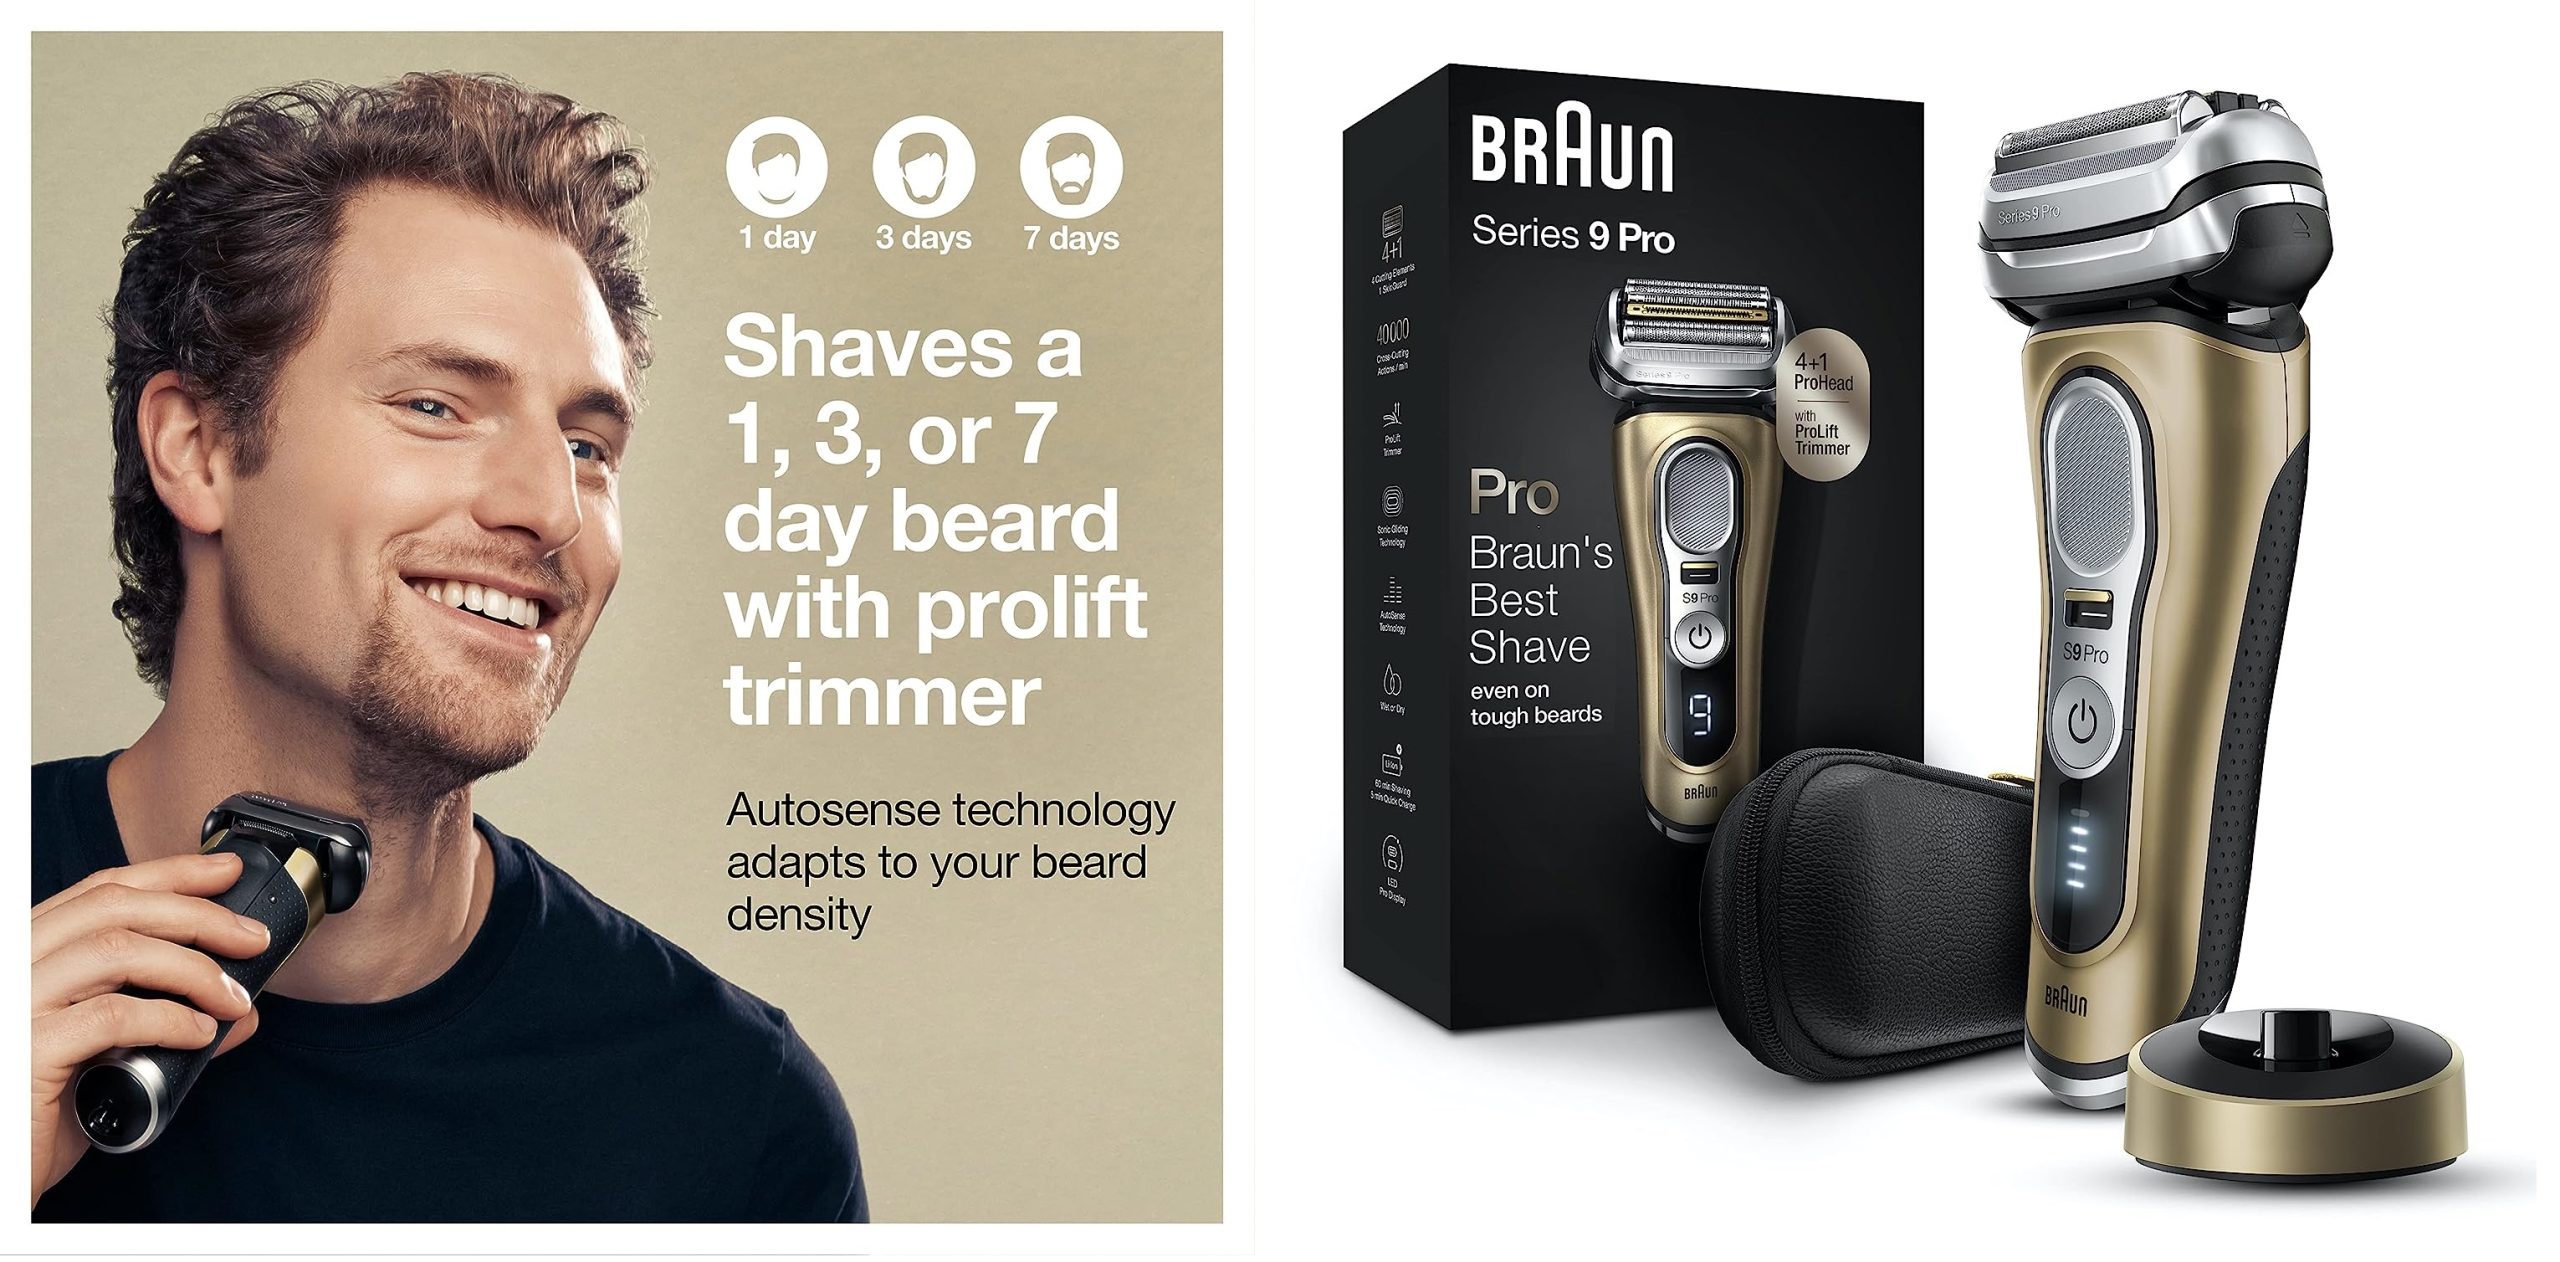 Braun Men's Shaver - One Of The Must Have Christmas Gifts for Gents in 2023